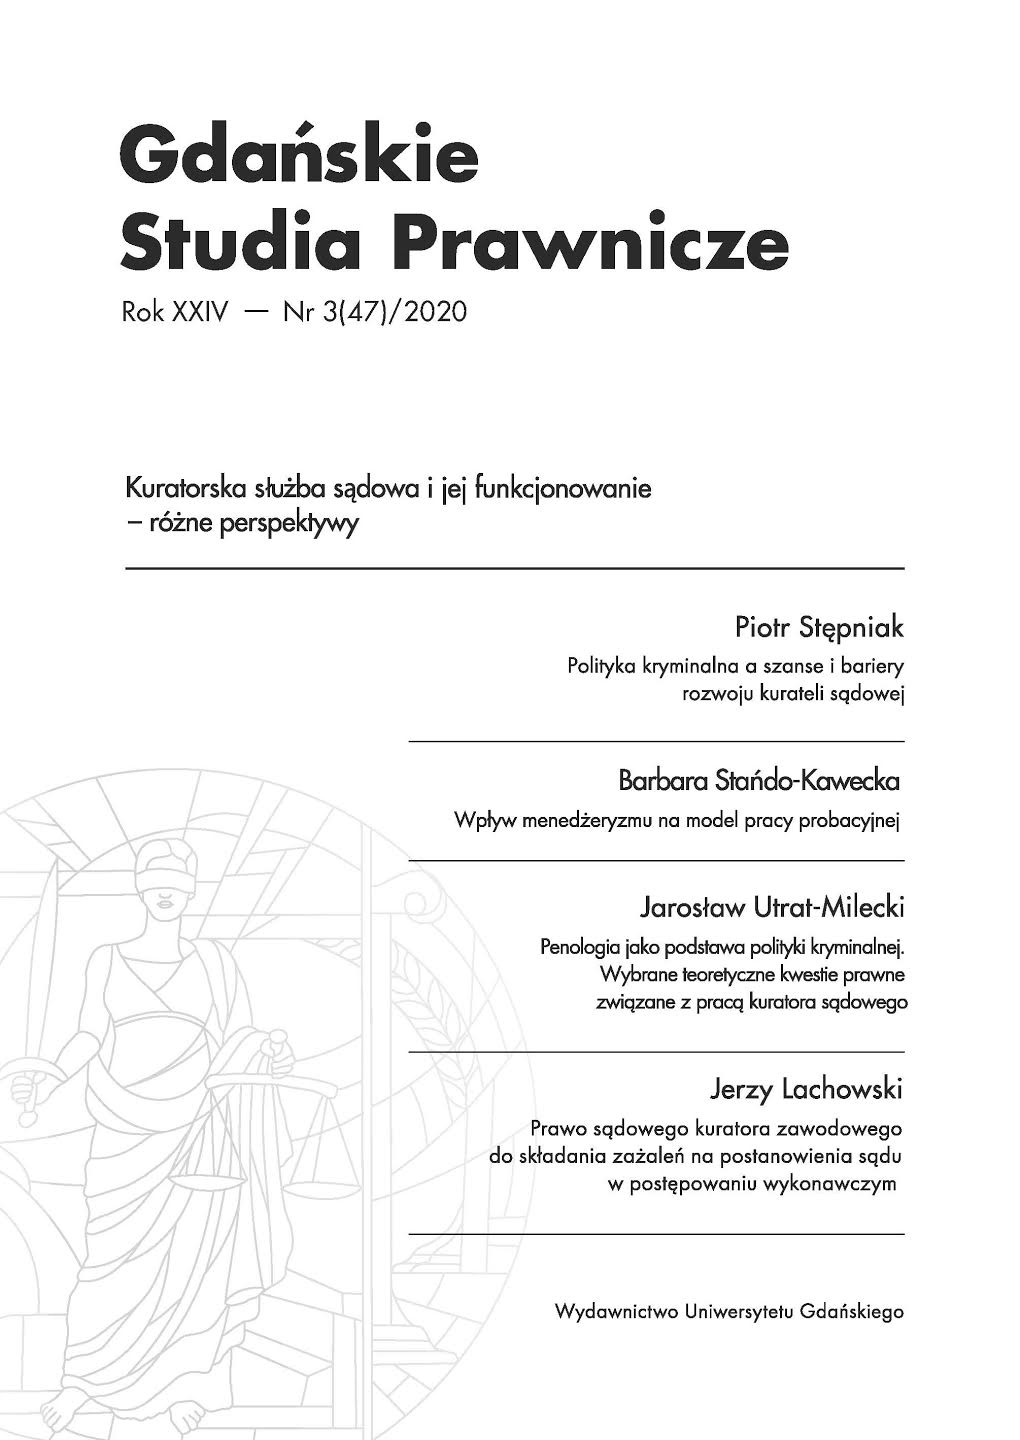 Role and significance of a probation officer in regard to crimes against family on the example of the offence under art. 207 of the Polish Criminal Code Cover Image